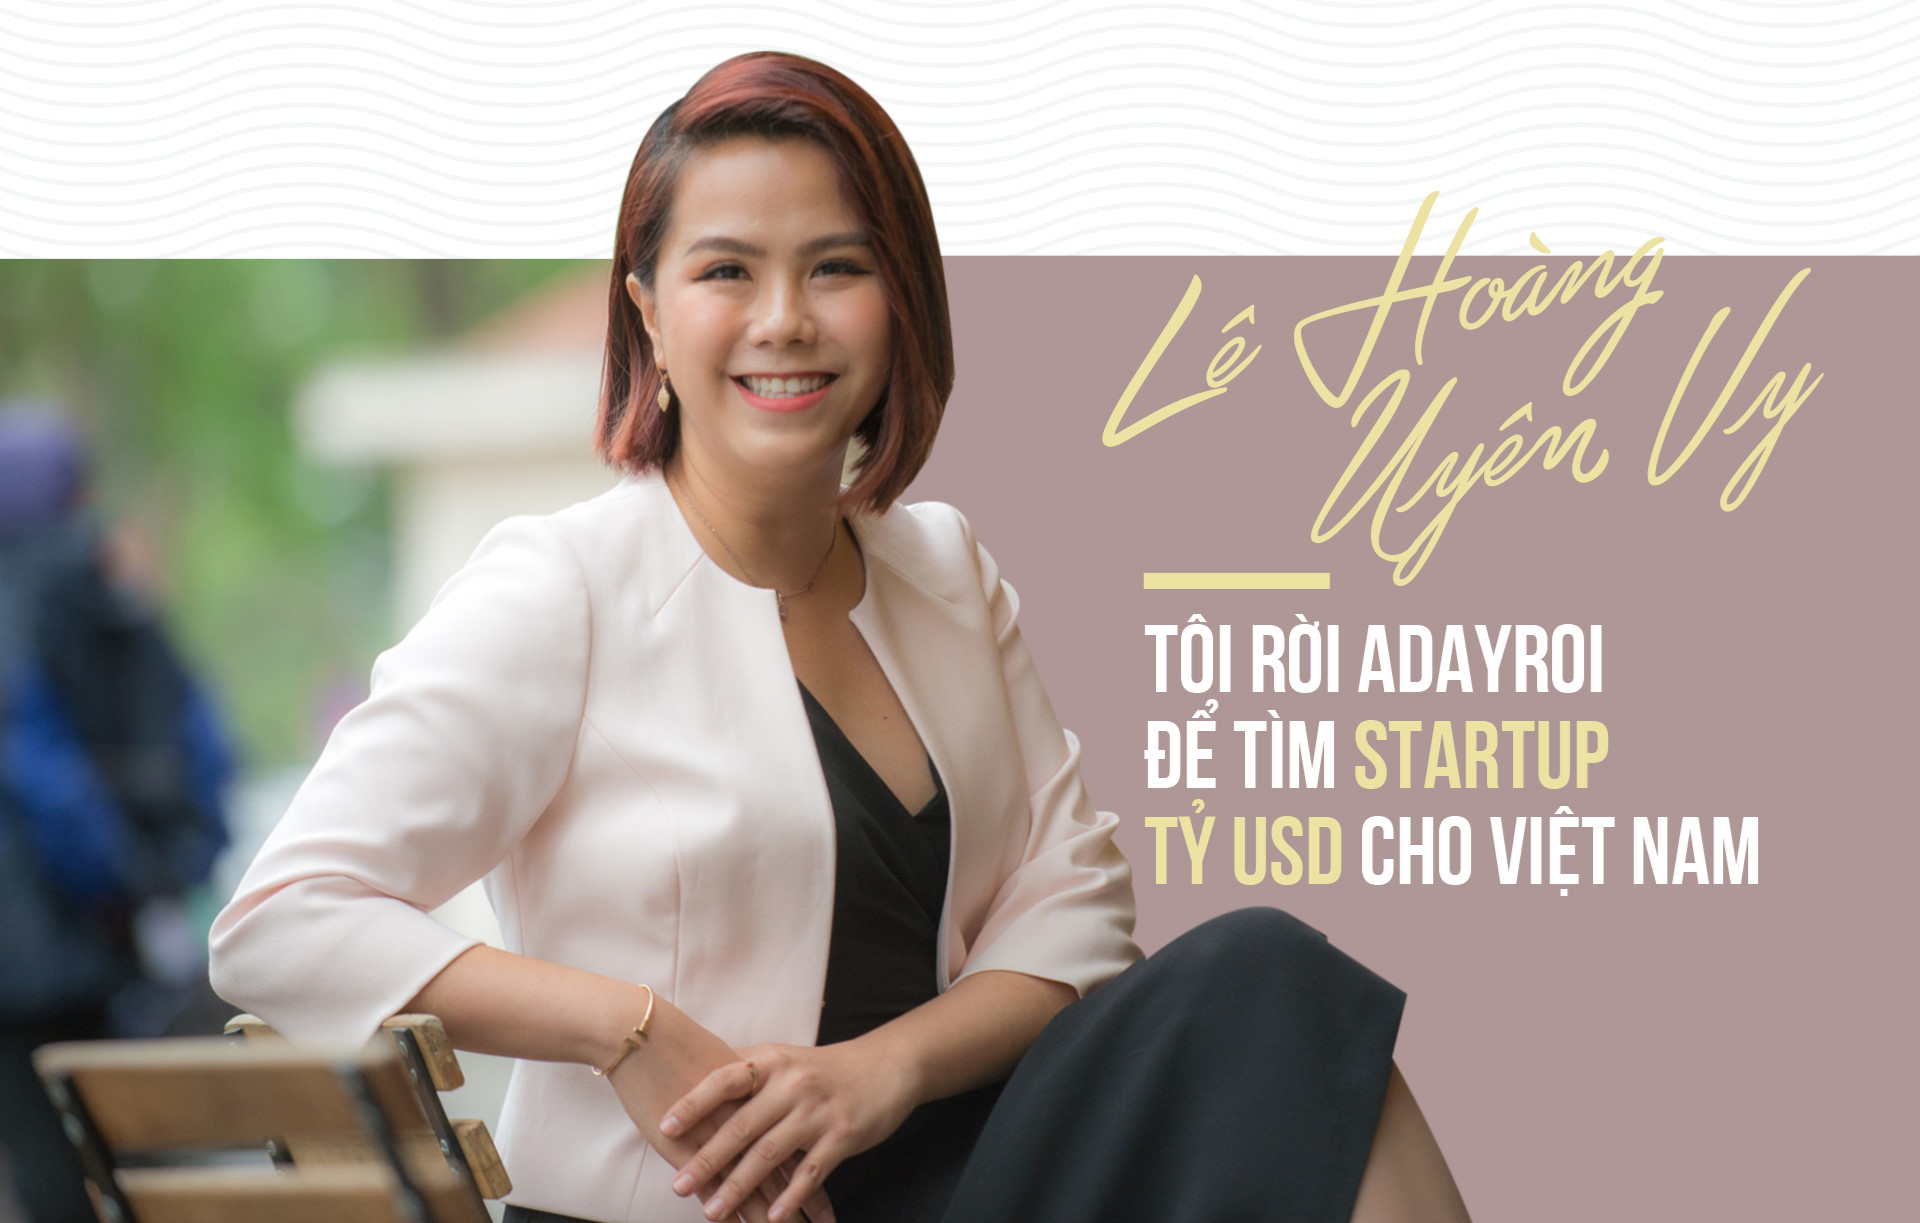 Le Hoang Uyen Vy: Toi roi Adayroi de tim startup ty USD cho Viet Nam hinh anh 2